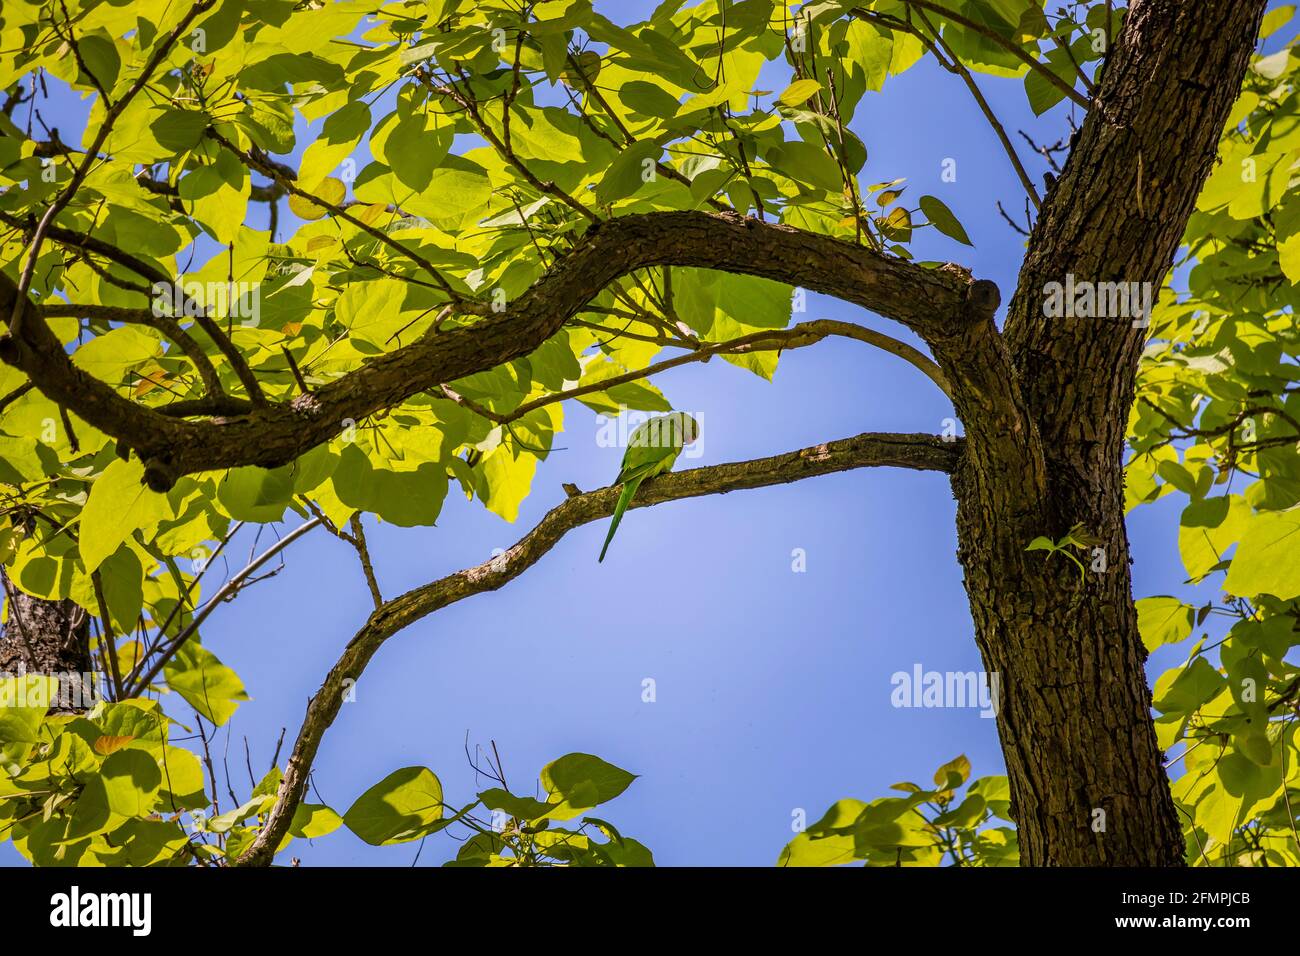 A small green parrot perched on a tree branch. Budgie, parakeet. Non-native bird species that has invaded the city of Rome. Photographed from below, a Stock Photo